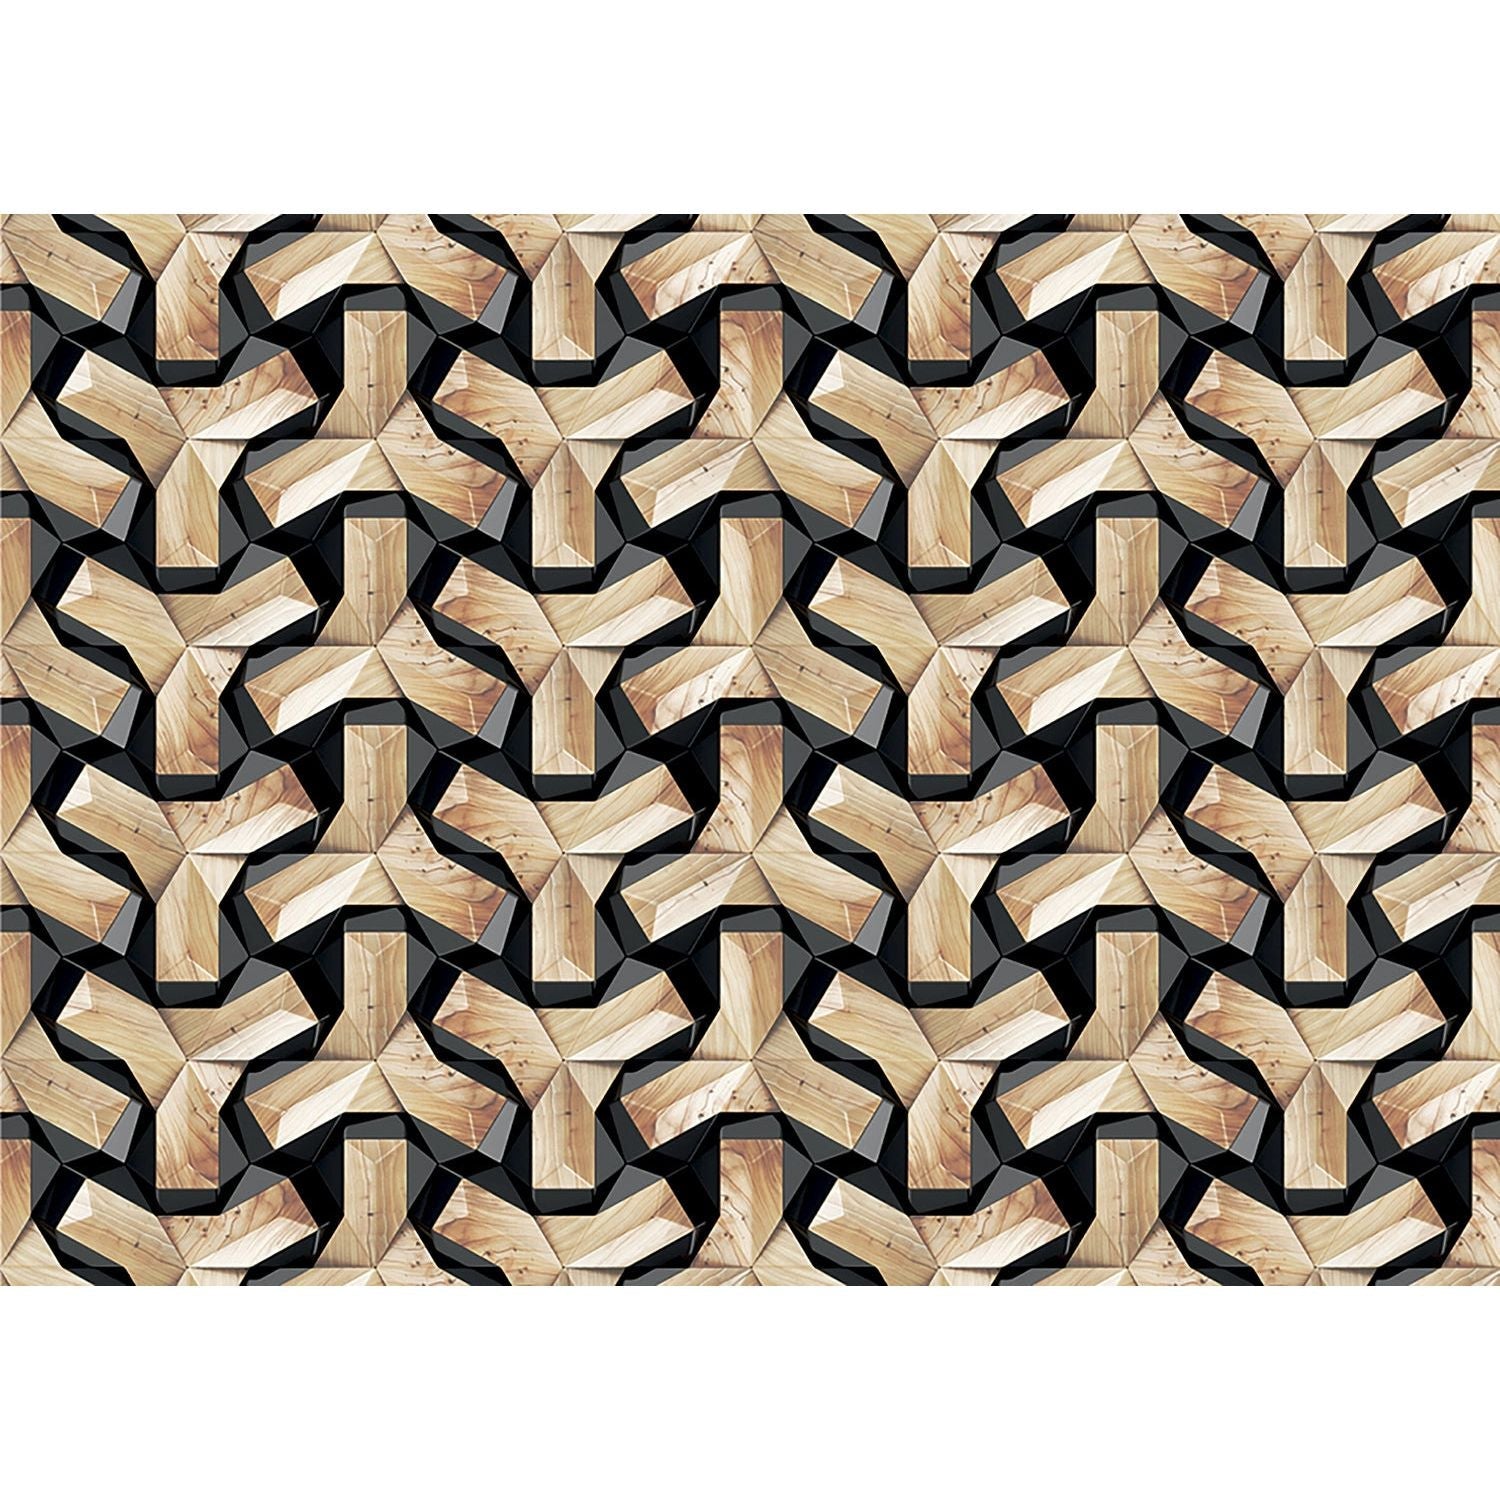 Geometric Intrigue: Wooden Weave Illusion